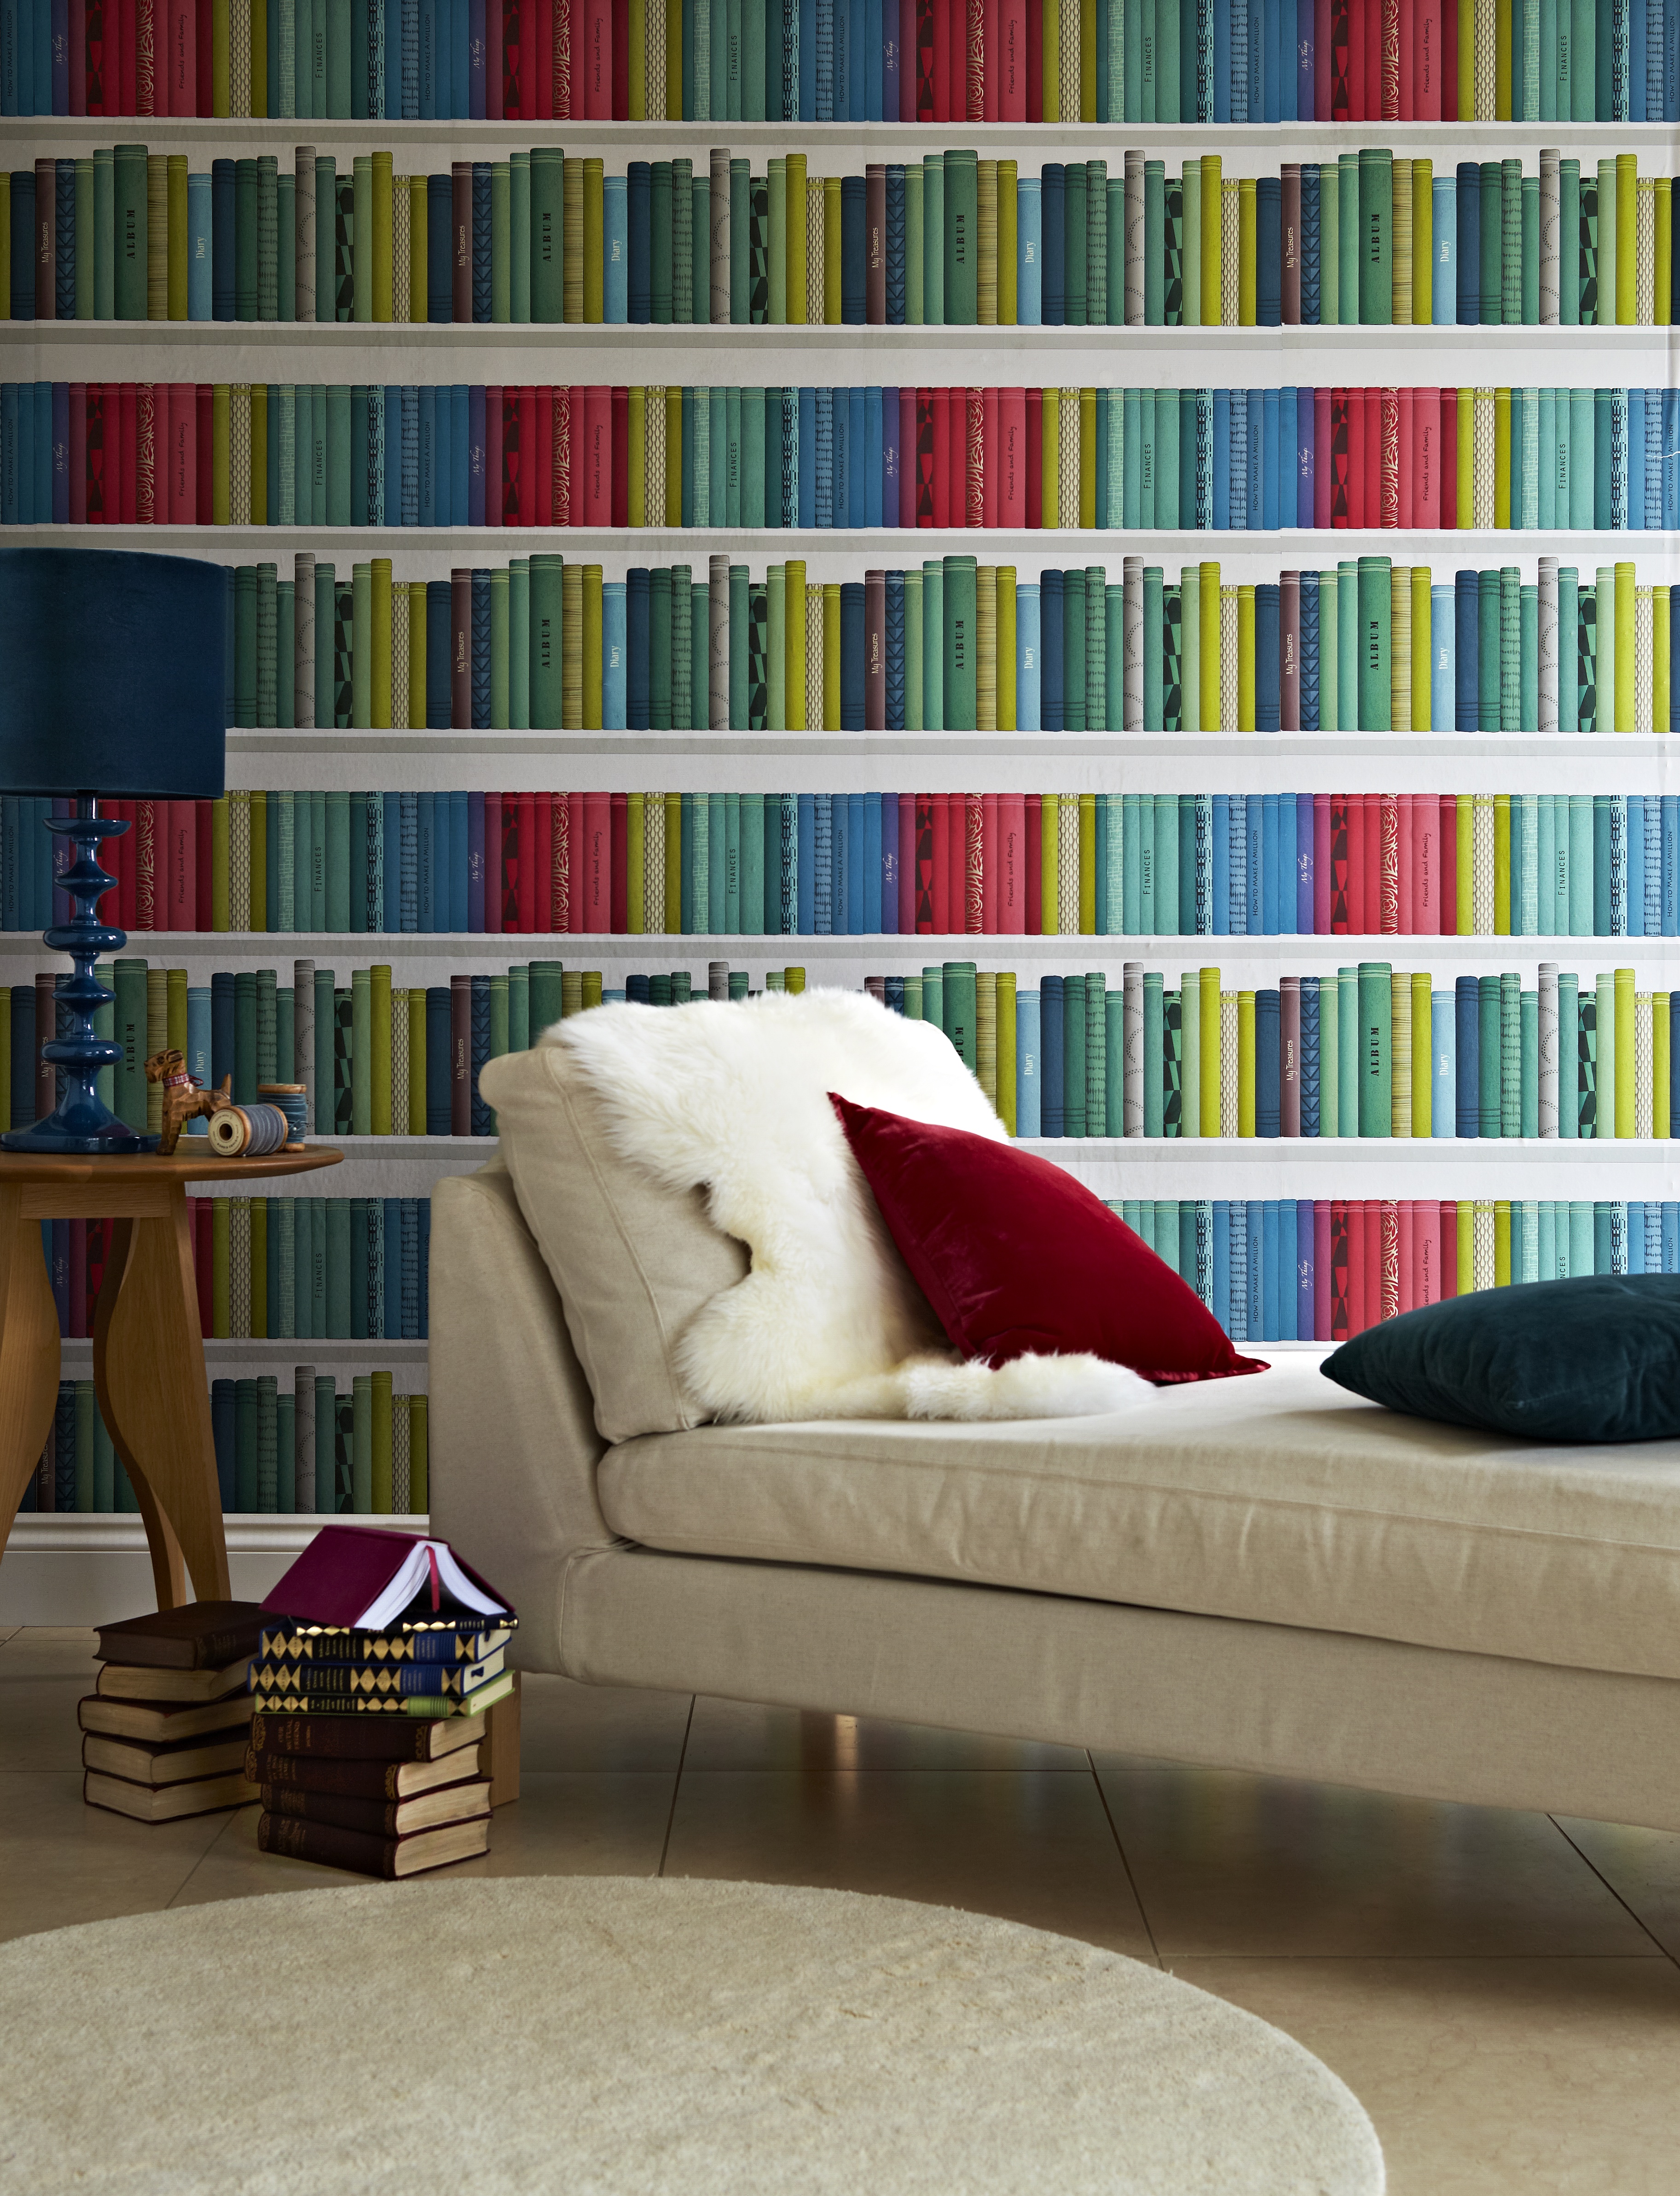 Design Contemporary Bookcase Wallpaper By Albany Fresh